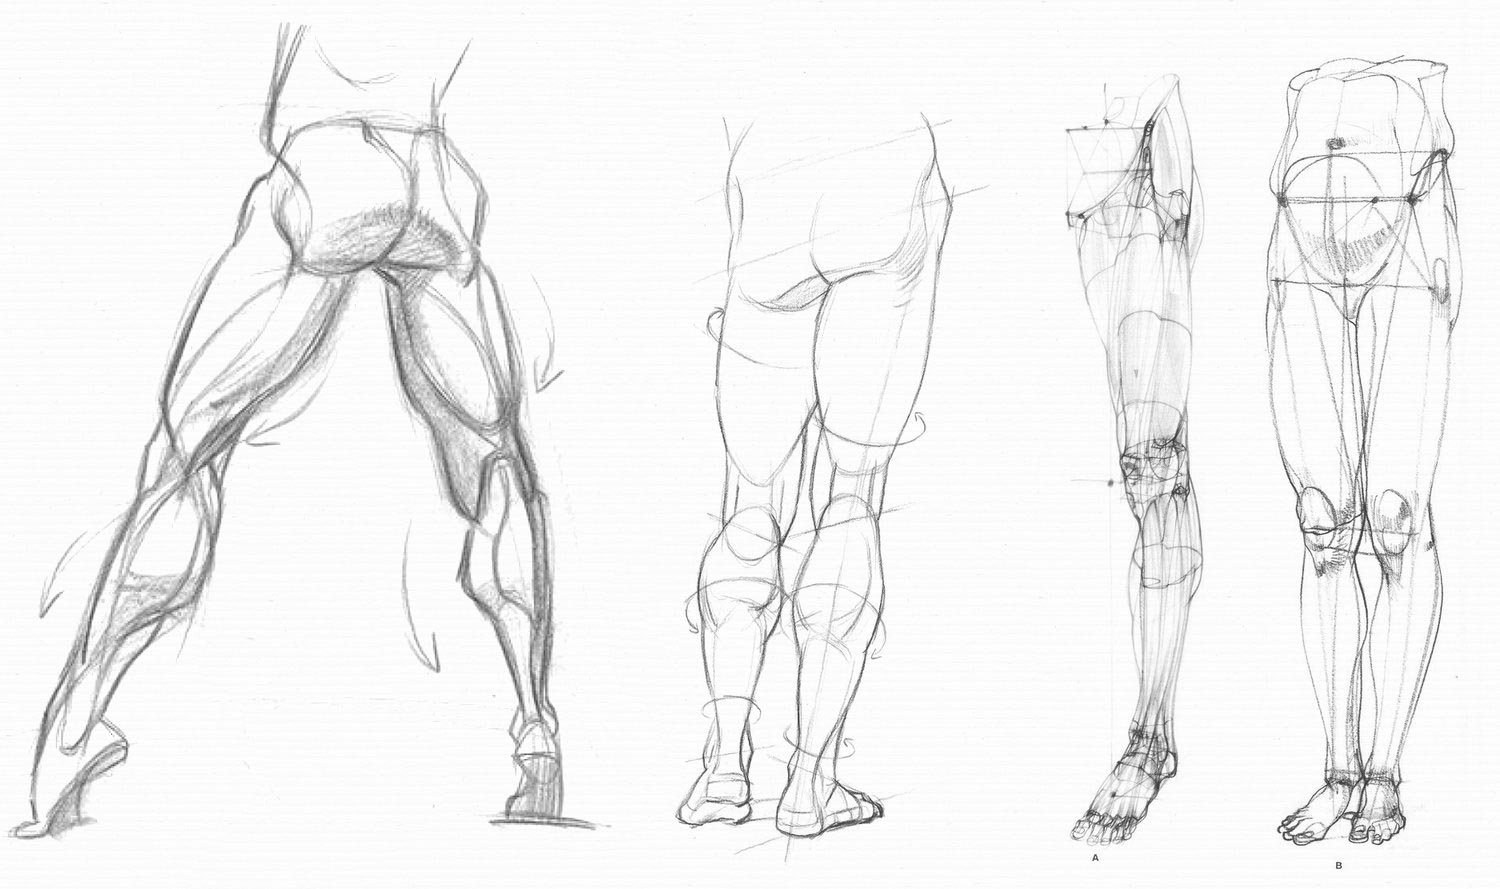 Calf muscle drawing reference